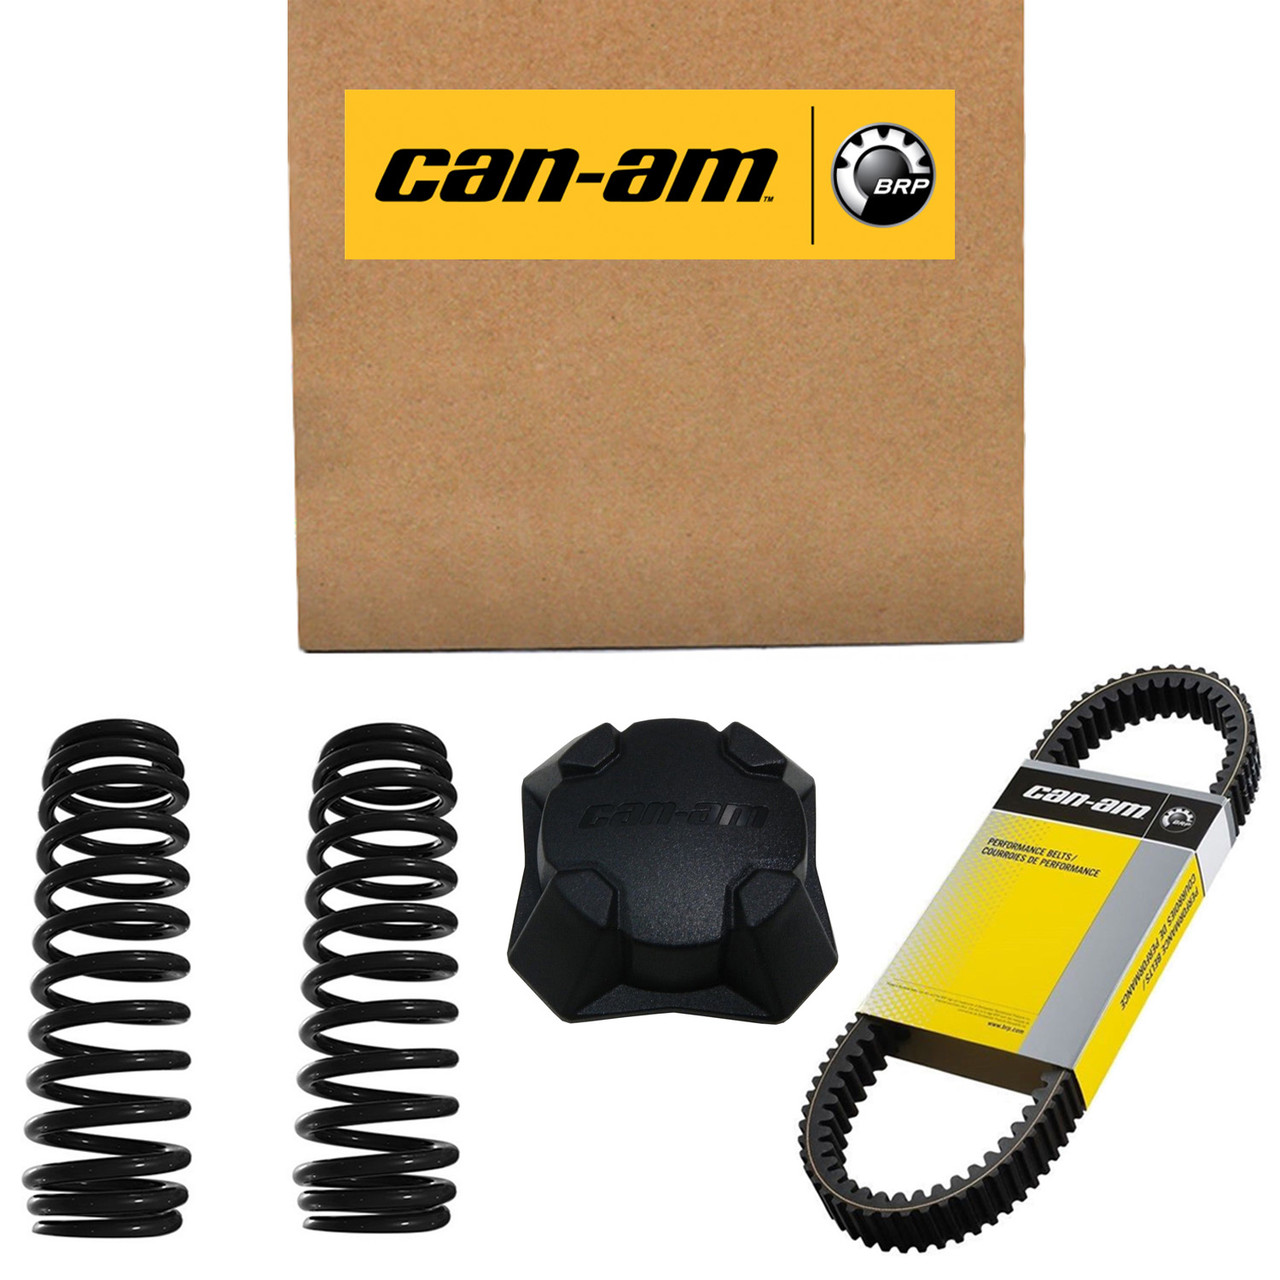 Can-Am New OEM Operator Guide 2019 English, 219002009